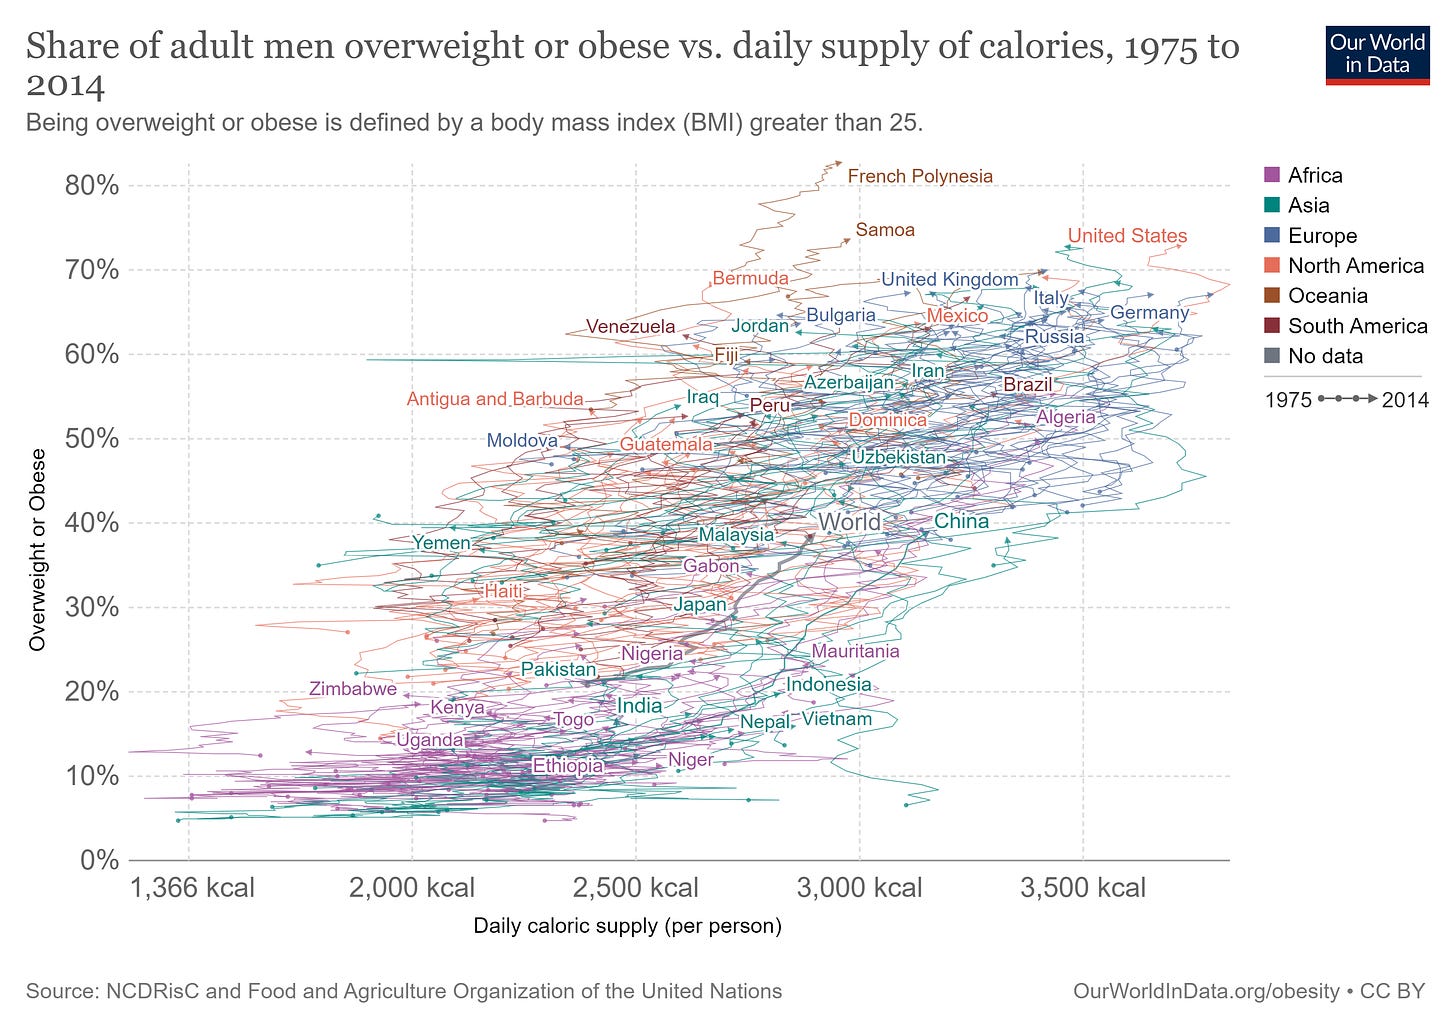 Share of men (% of adult population), who are overweight or obese based on body mass index (BMI)